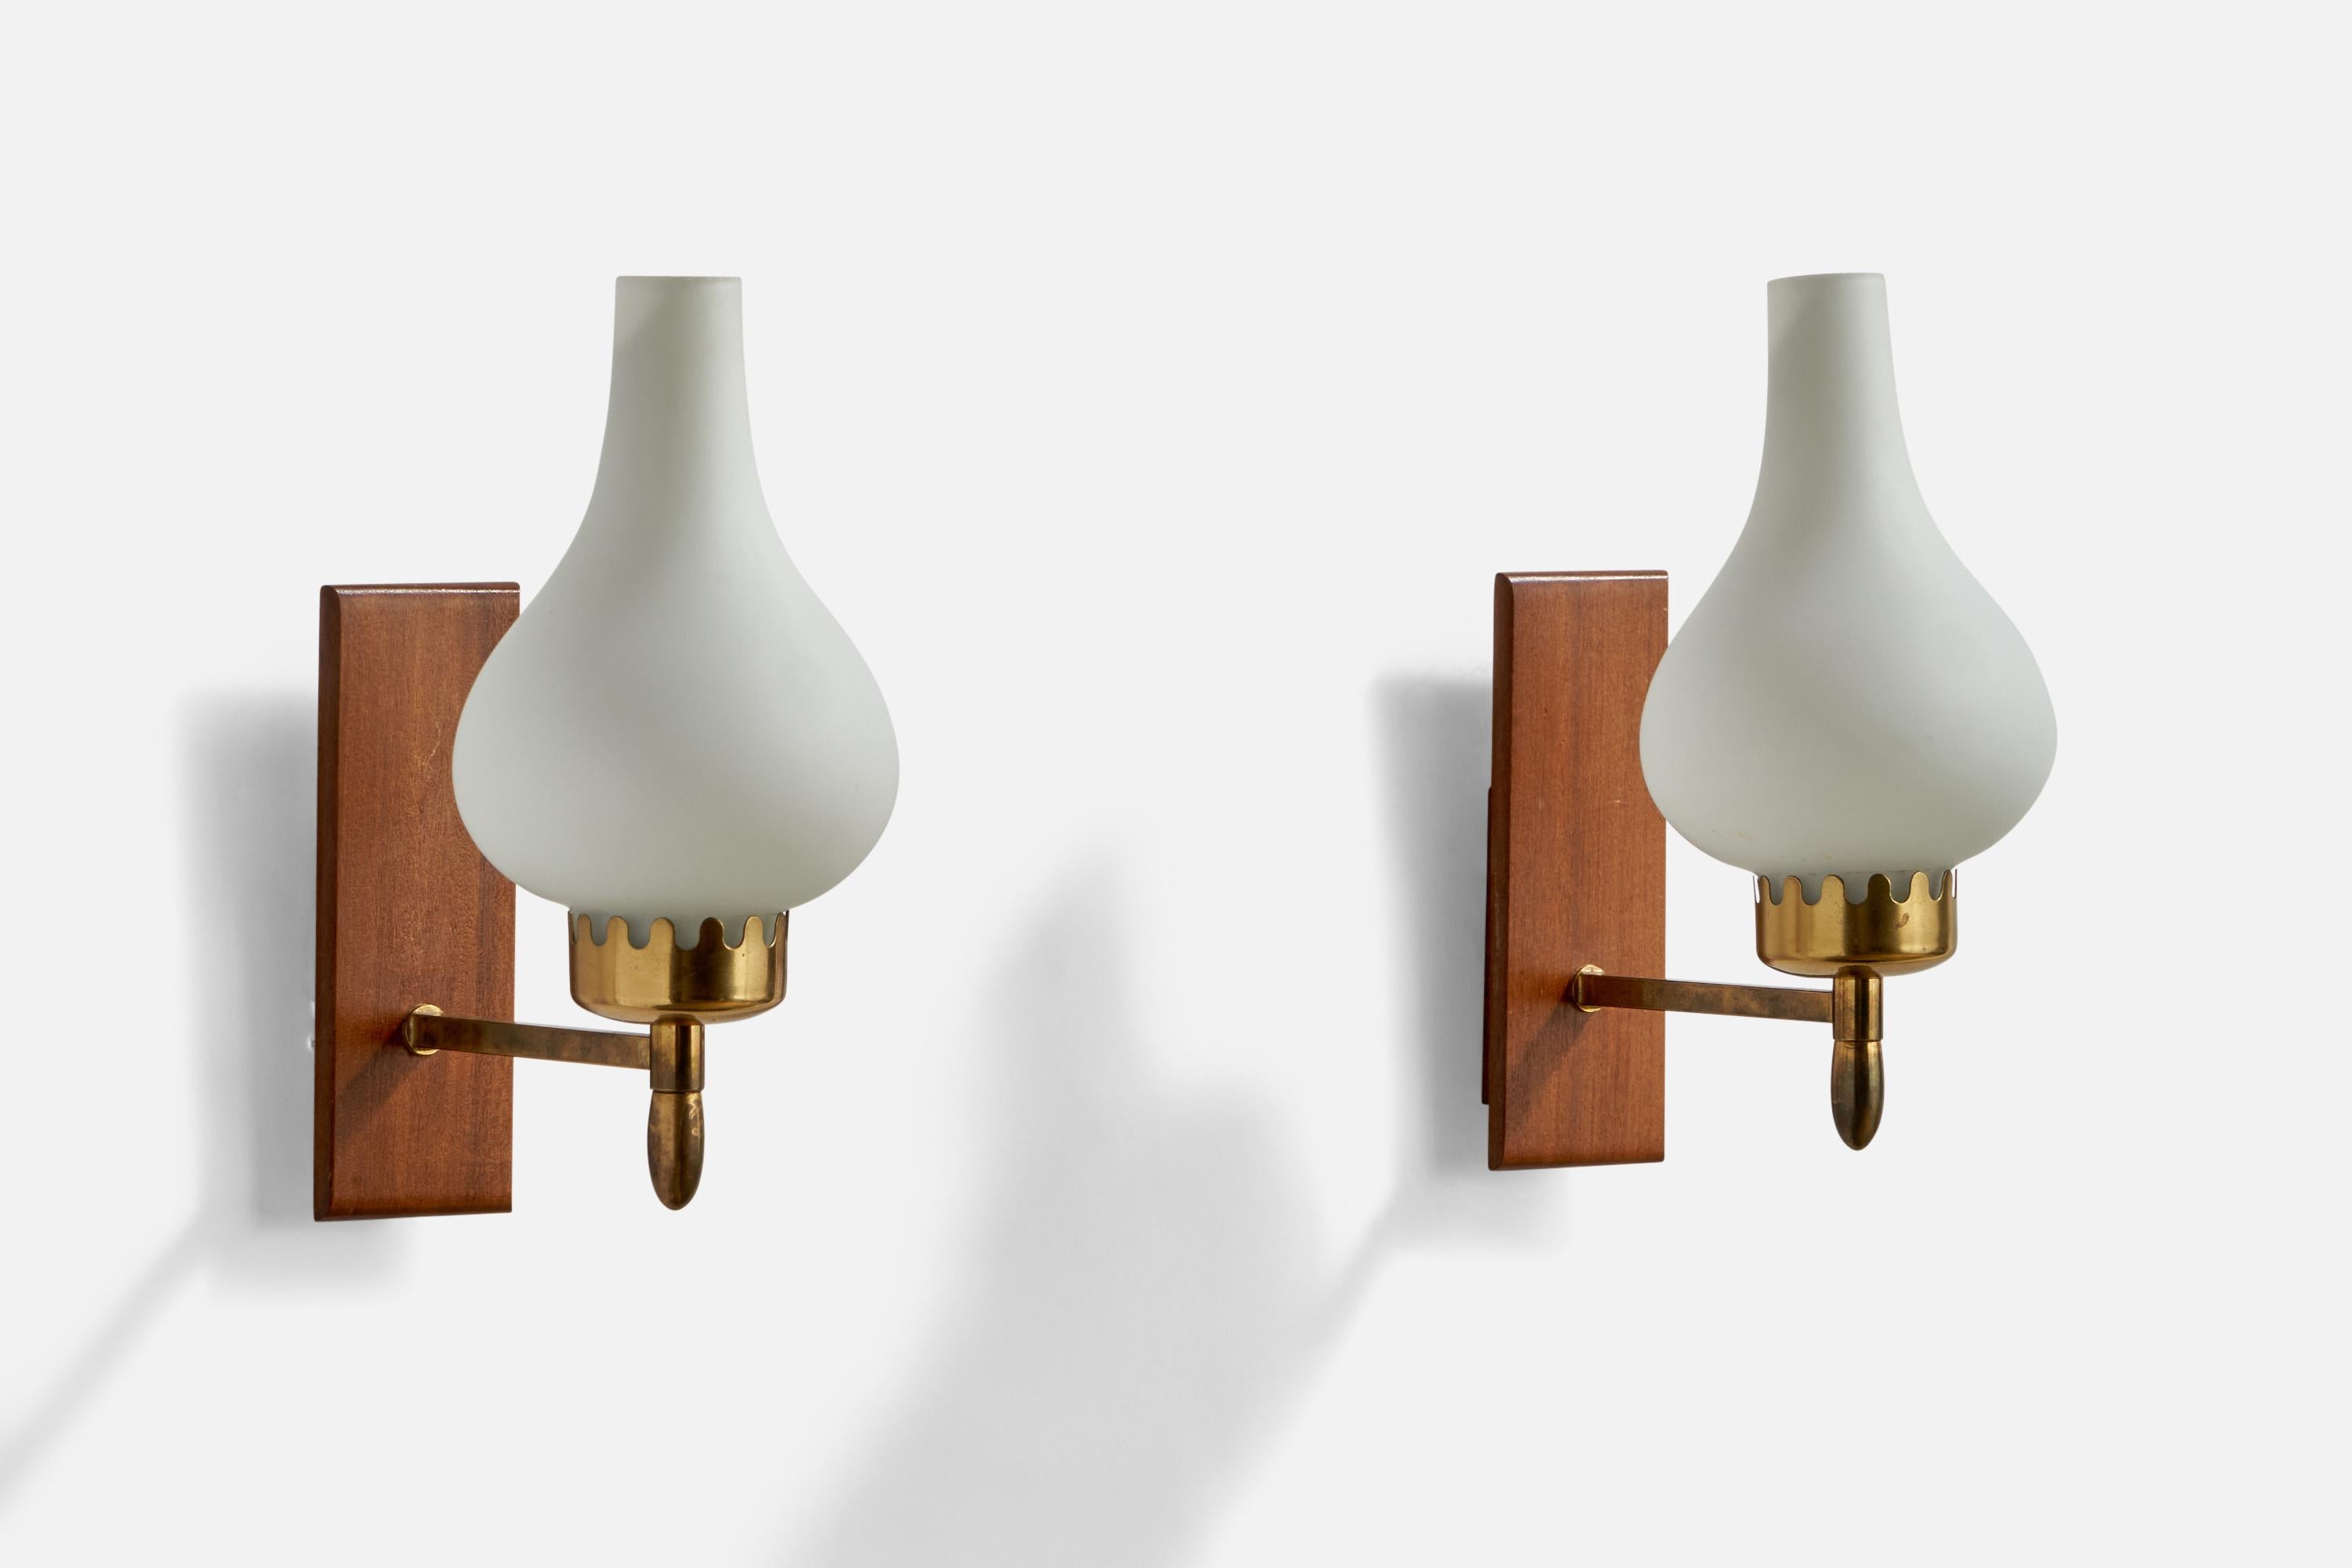 A pair of brass, teak and opaline glass wall lights designed and produced in Sweden, 1940s.

Overall Dimensions (inches): 9” H x 4” W x 6.75” D
Back Plate Dimensions (inches): 6” H x 2.1” W x 0.8” D
Bulb Specifications: E-14 Bulbs
Number of Sockets: